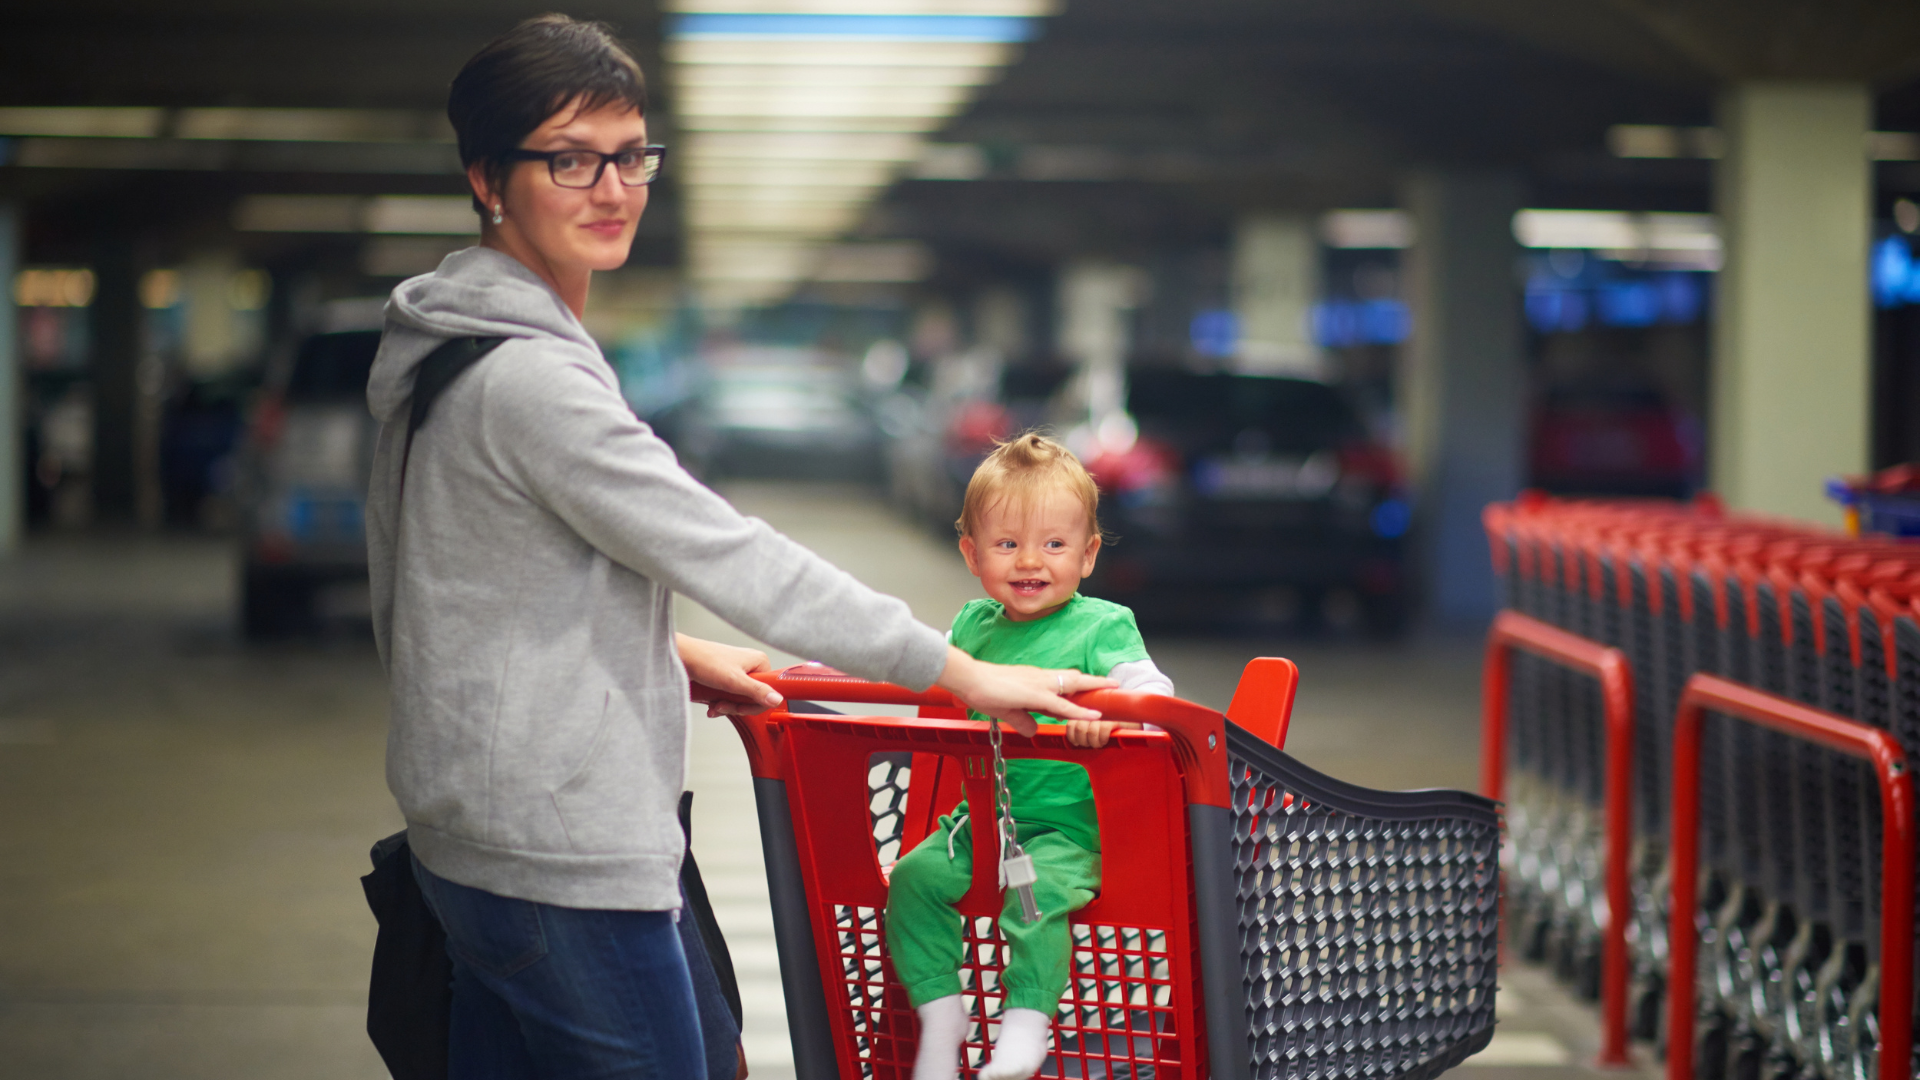 Tips for Stress-Free Grocery Shopping With a Baby